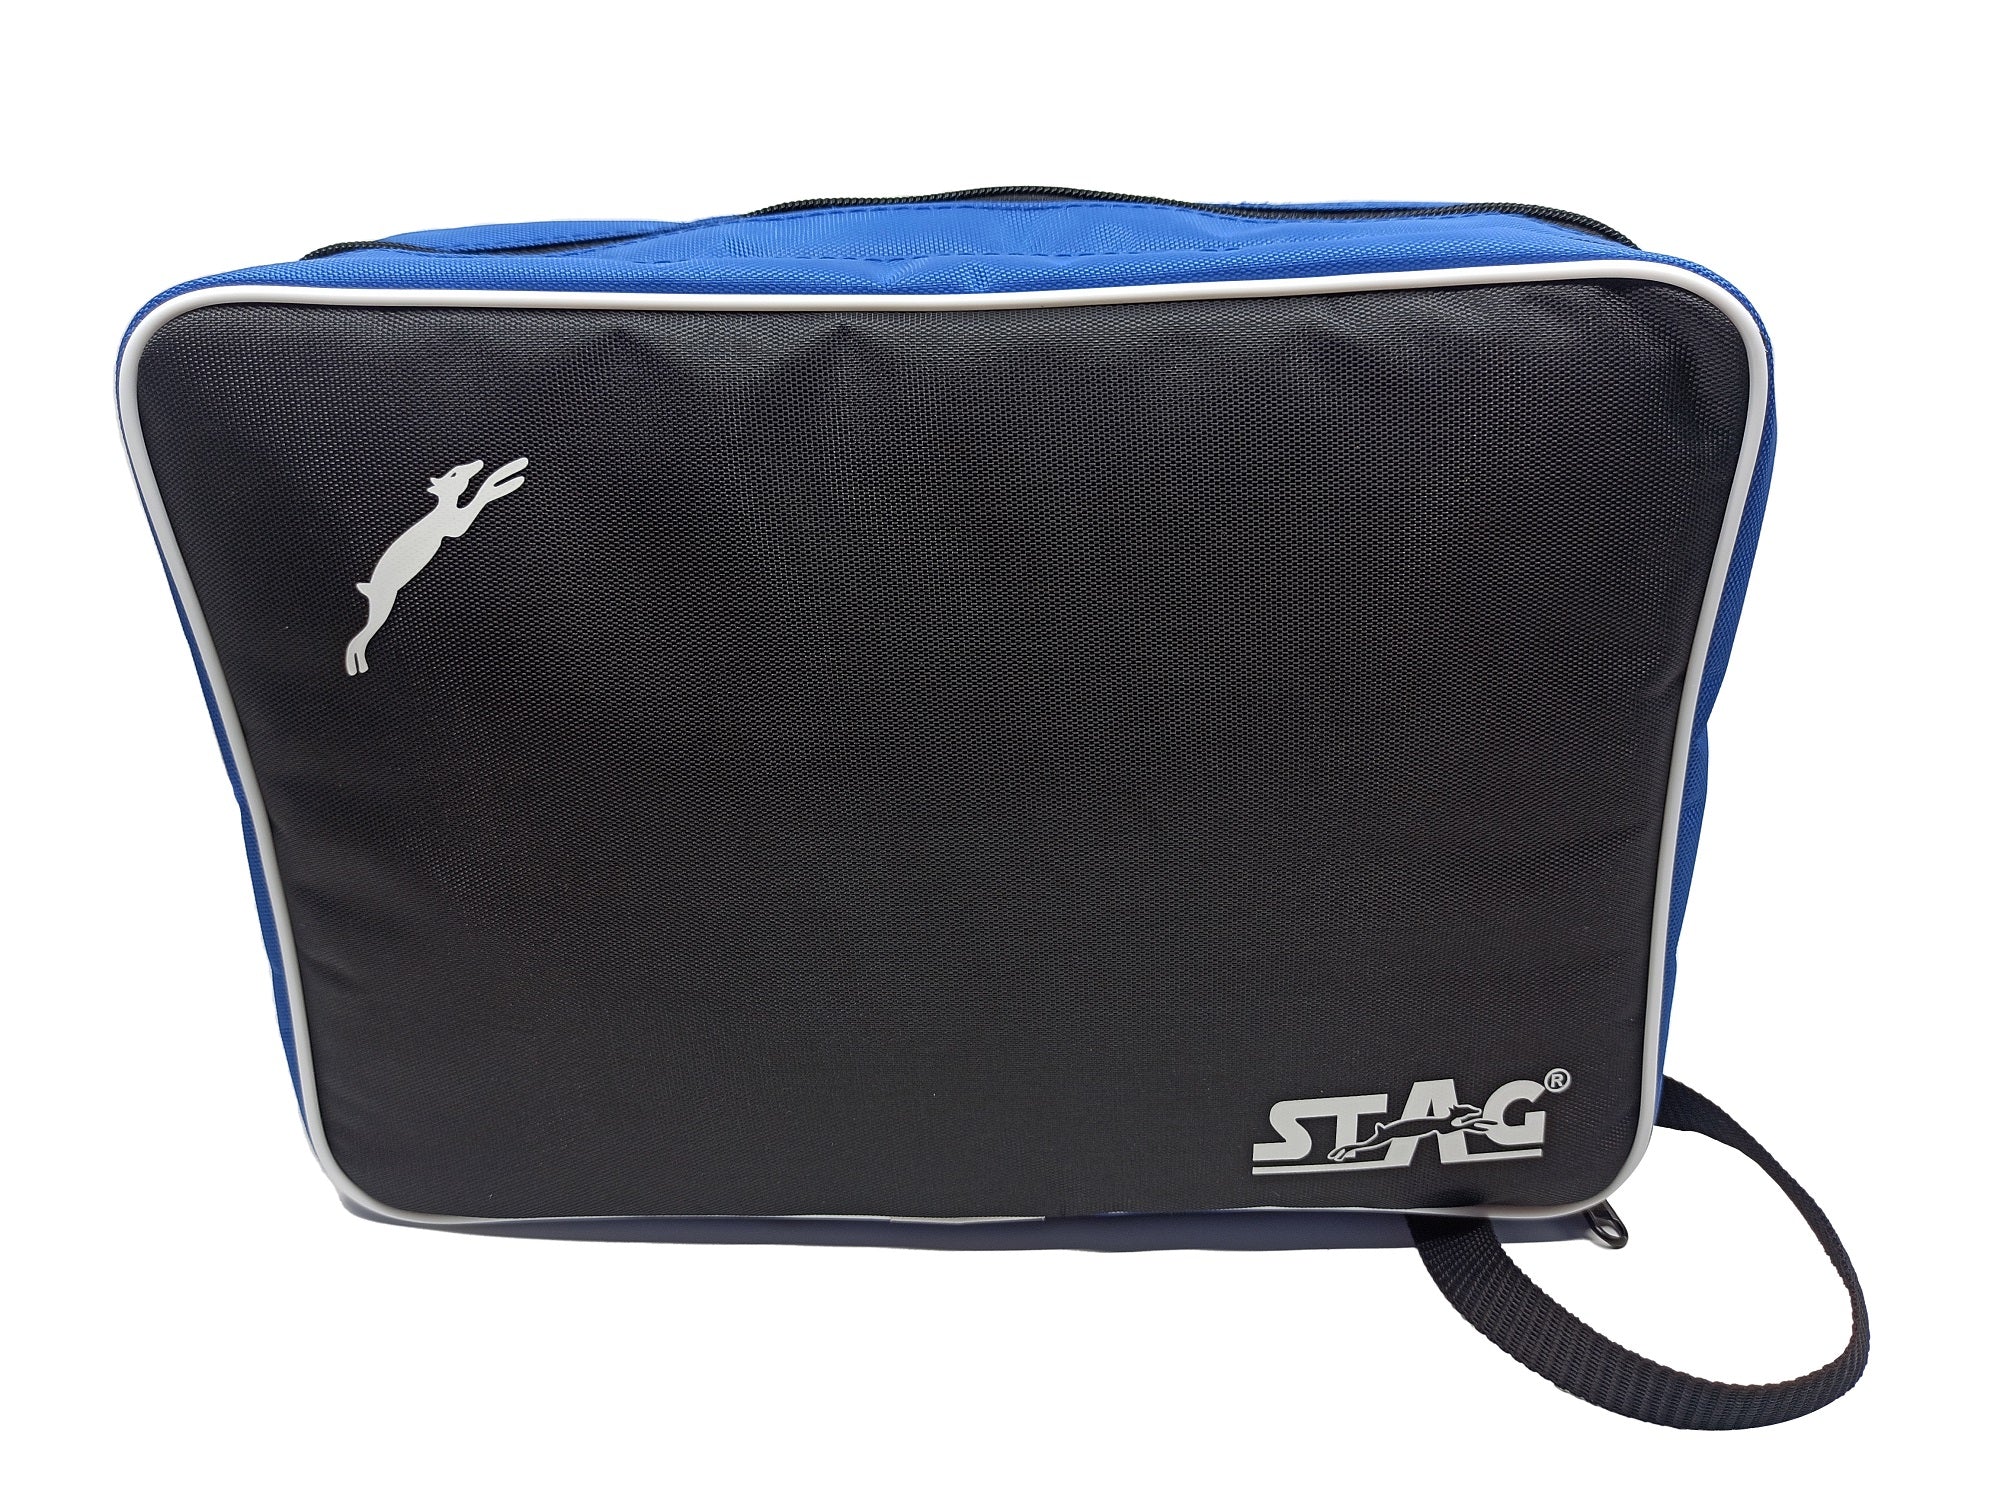 Stag Double Chain Deluxe Racket Case with Pocket for Accessories (Only